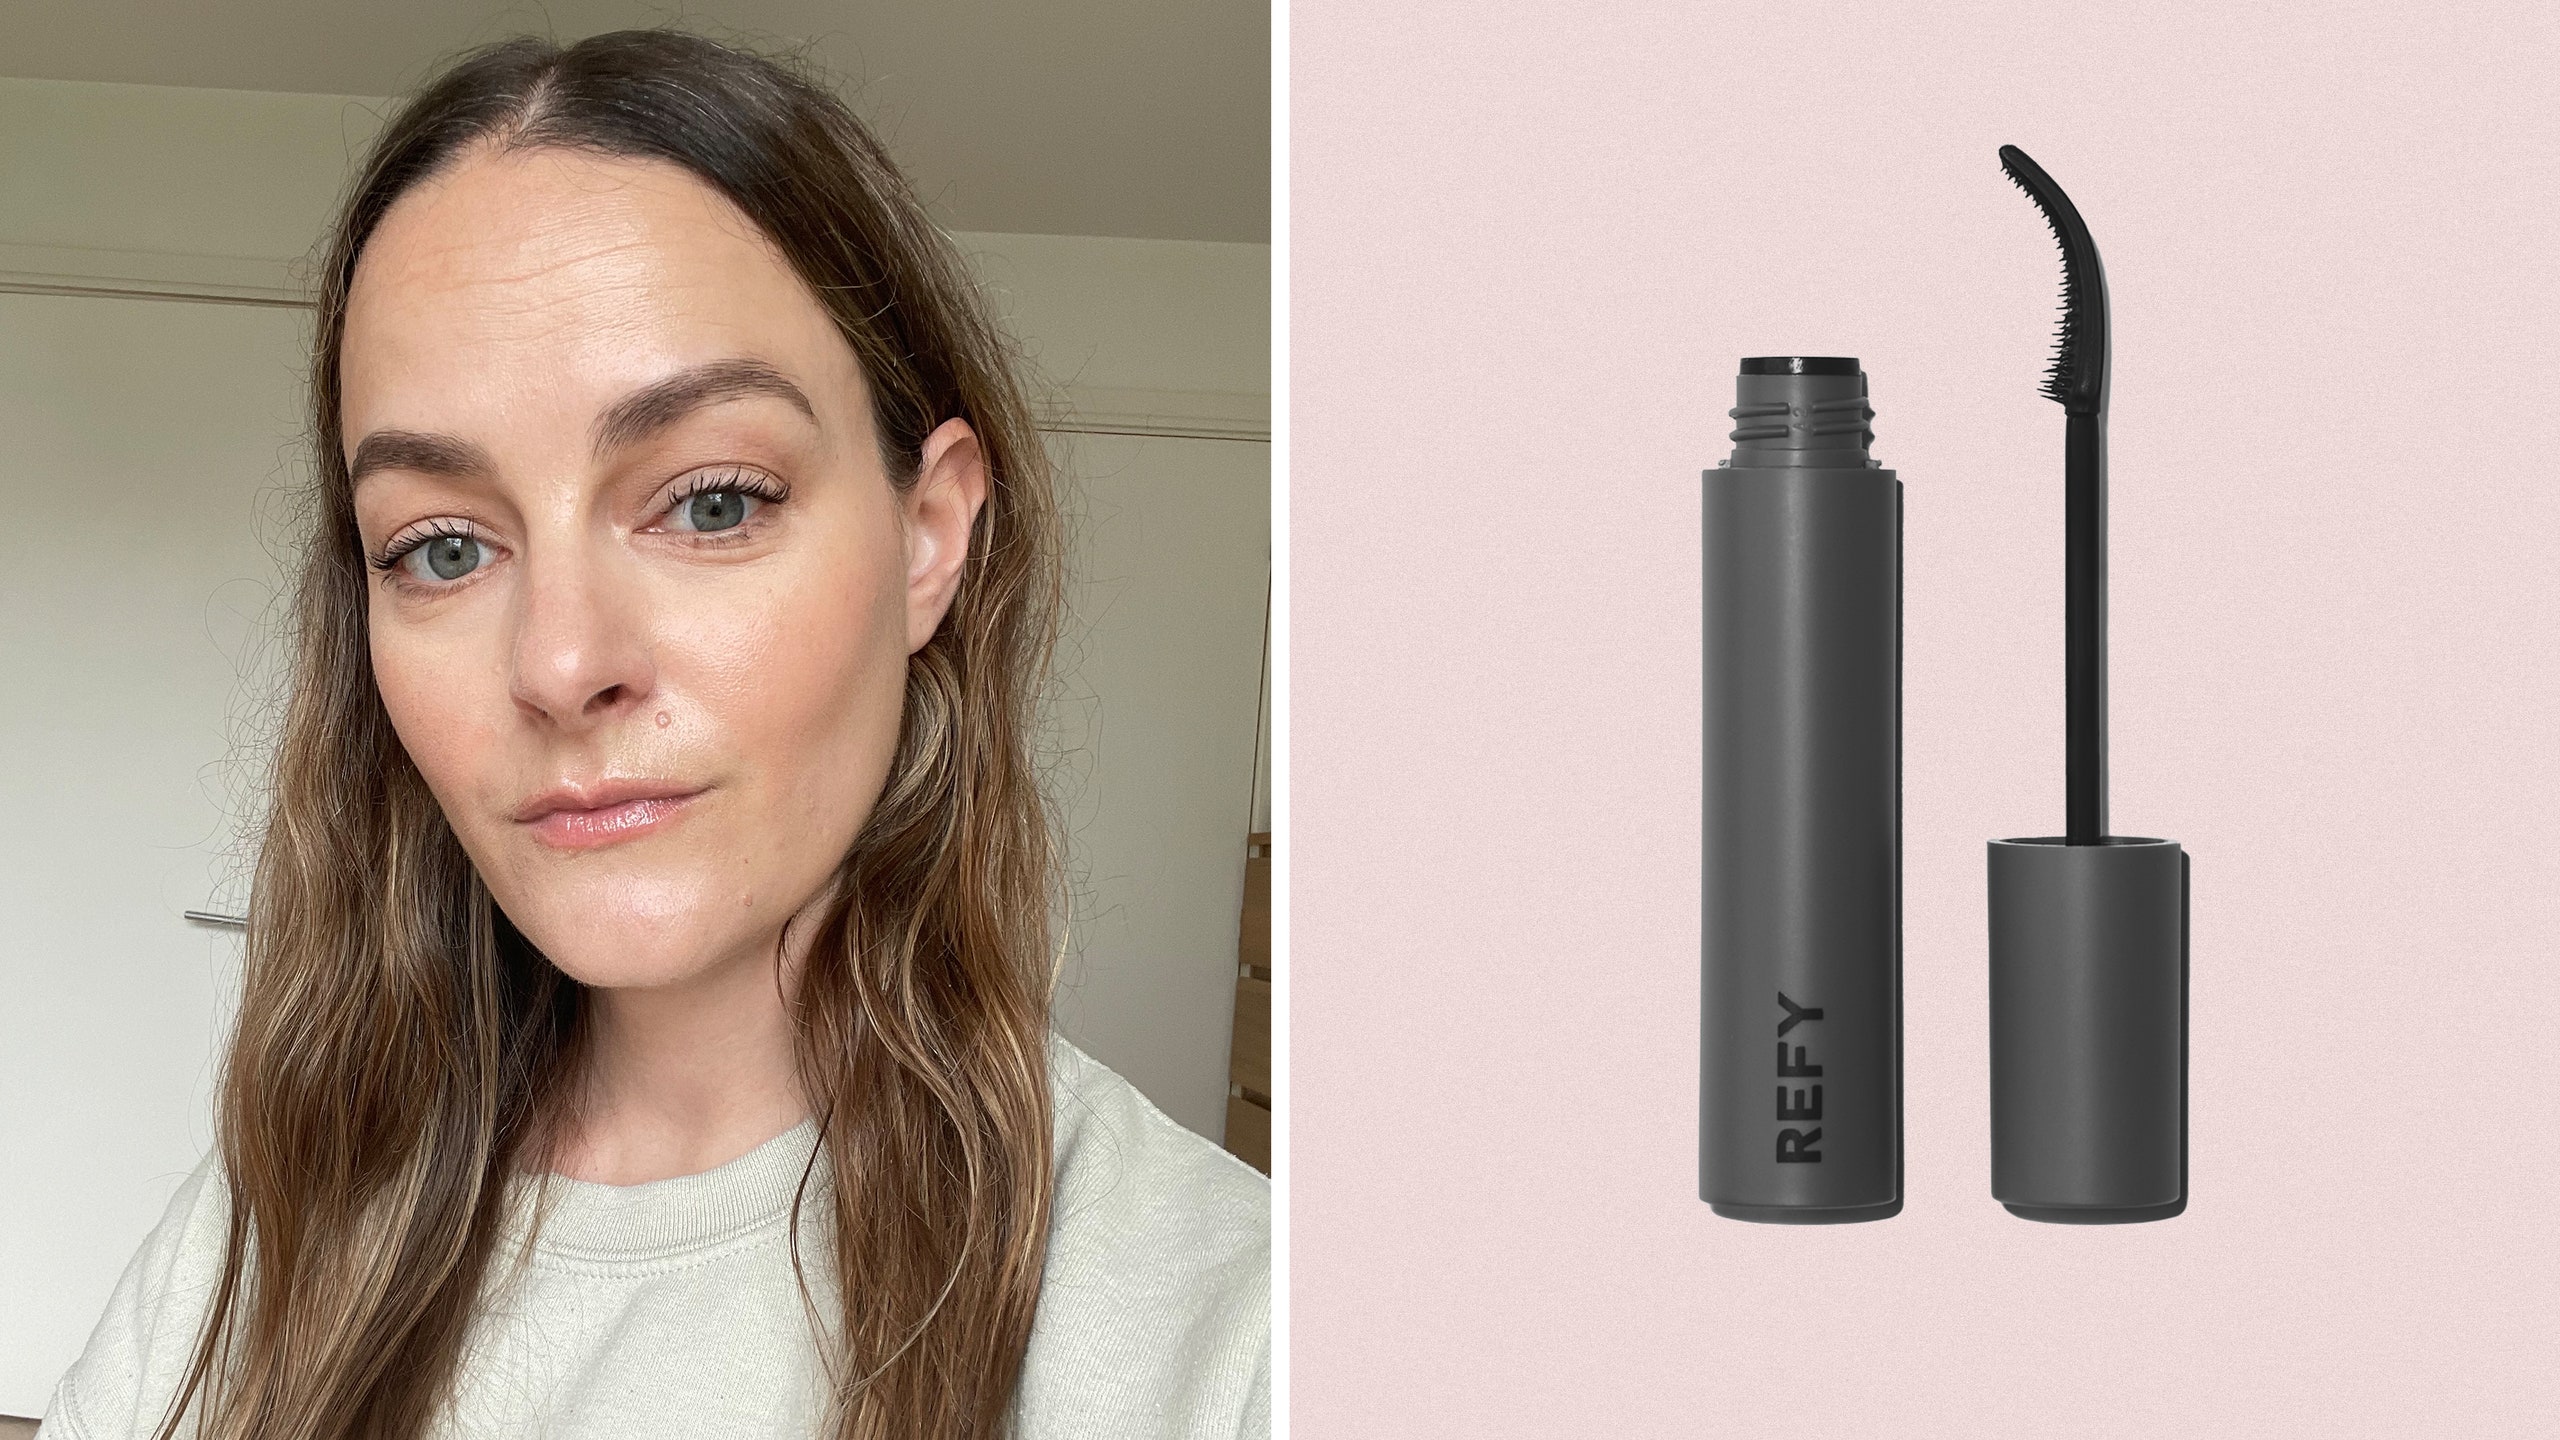 side by side photo of Allure contributor Sophia Panych and Refy Lash Sculpt Mascara on pink background